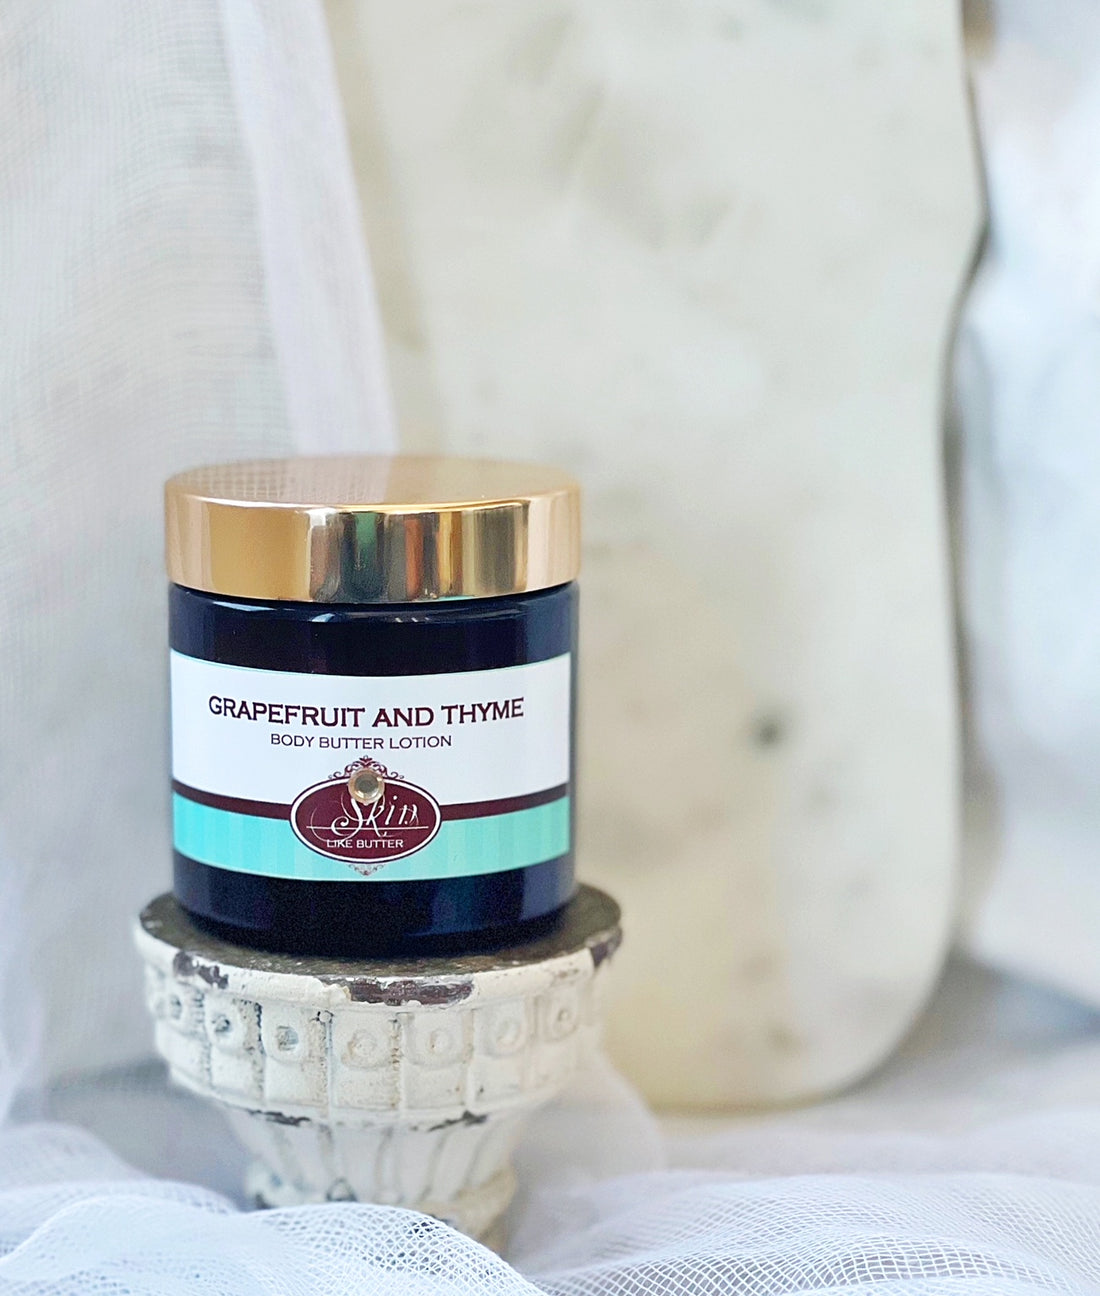 EGYPTIAN COTTON scented Body Butter, waterfree and non-greasy, vegan